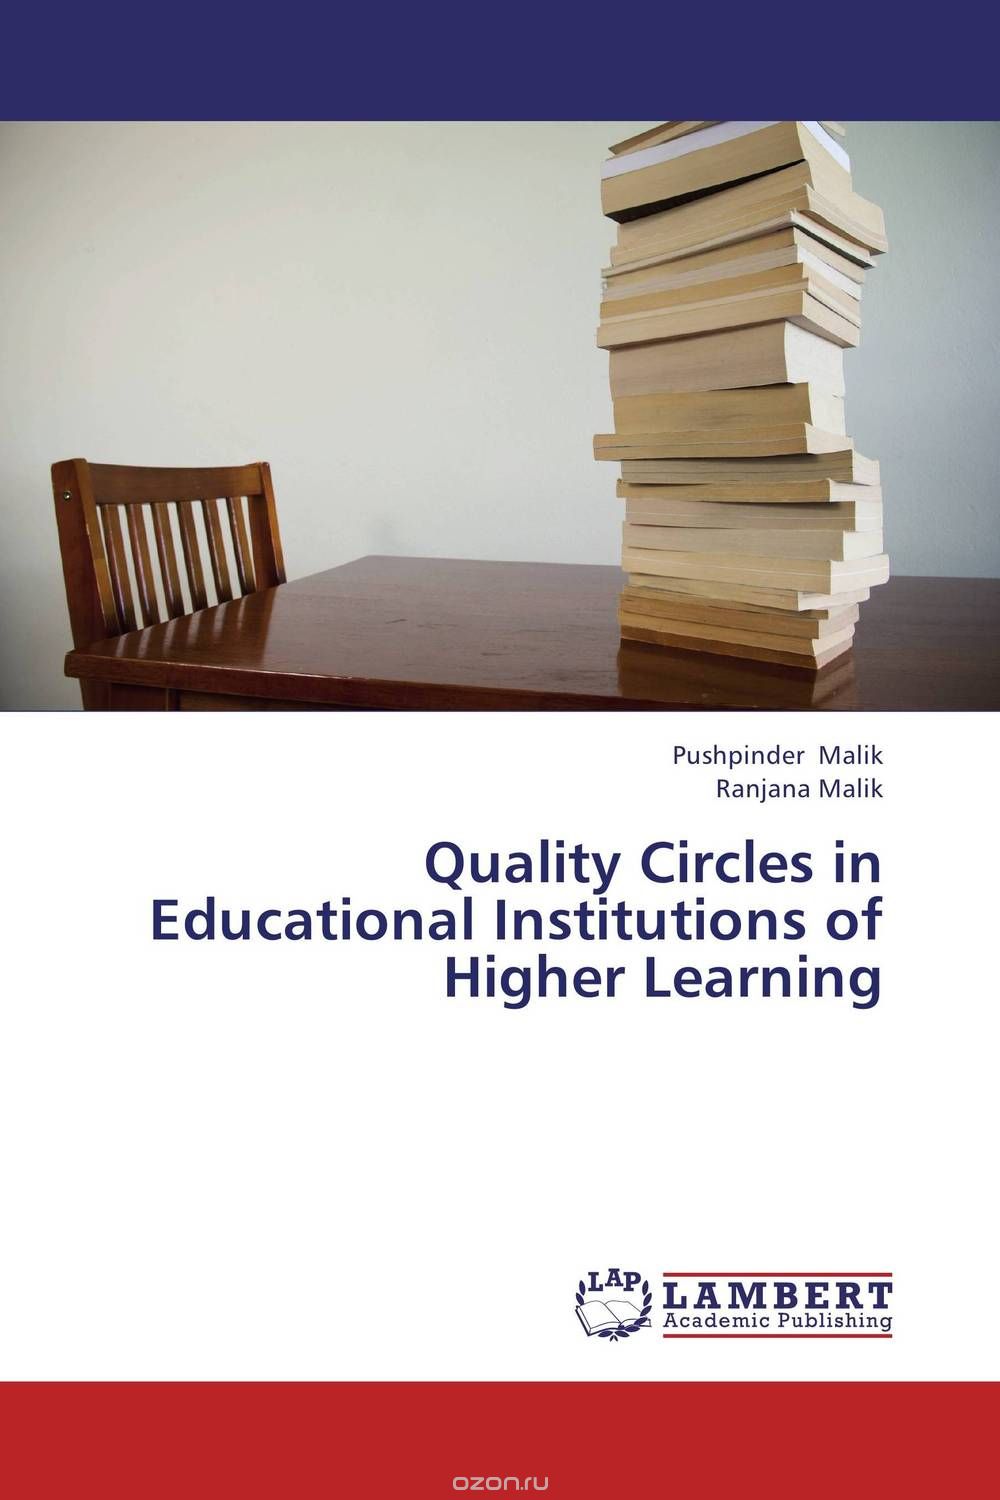 Скачать книгу "Quality Circles in Educational Institutions of Higher Learning"